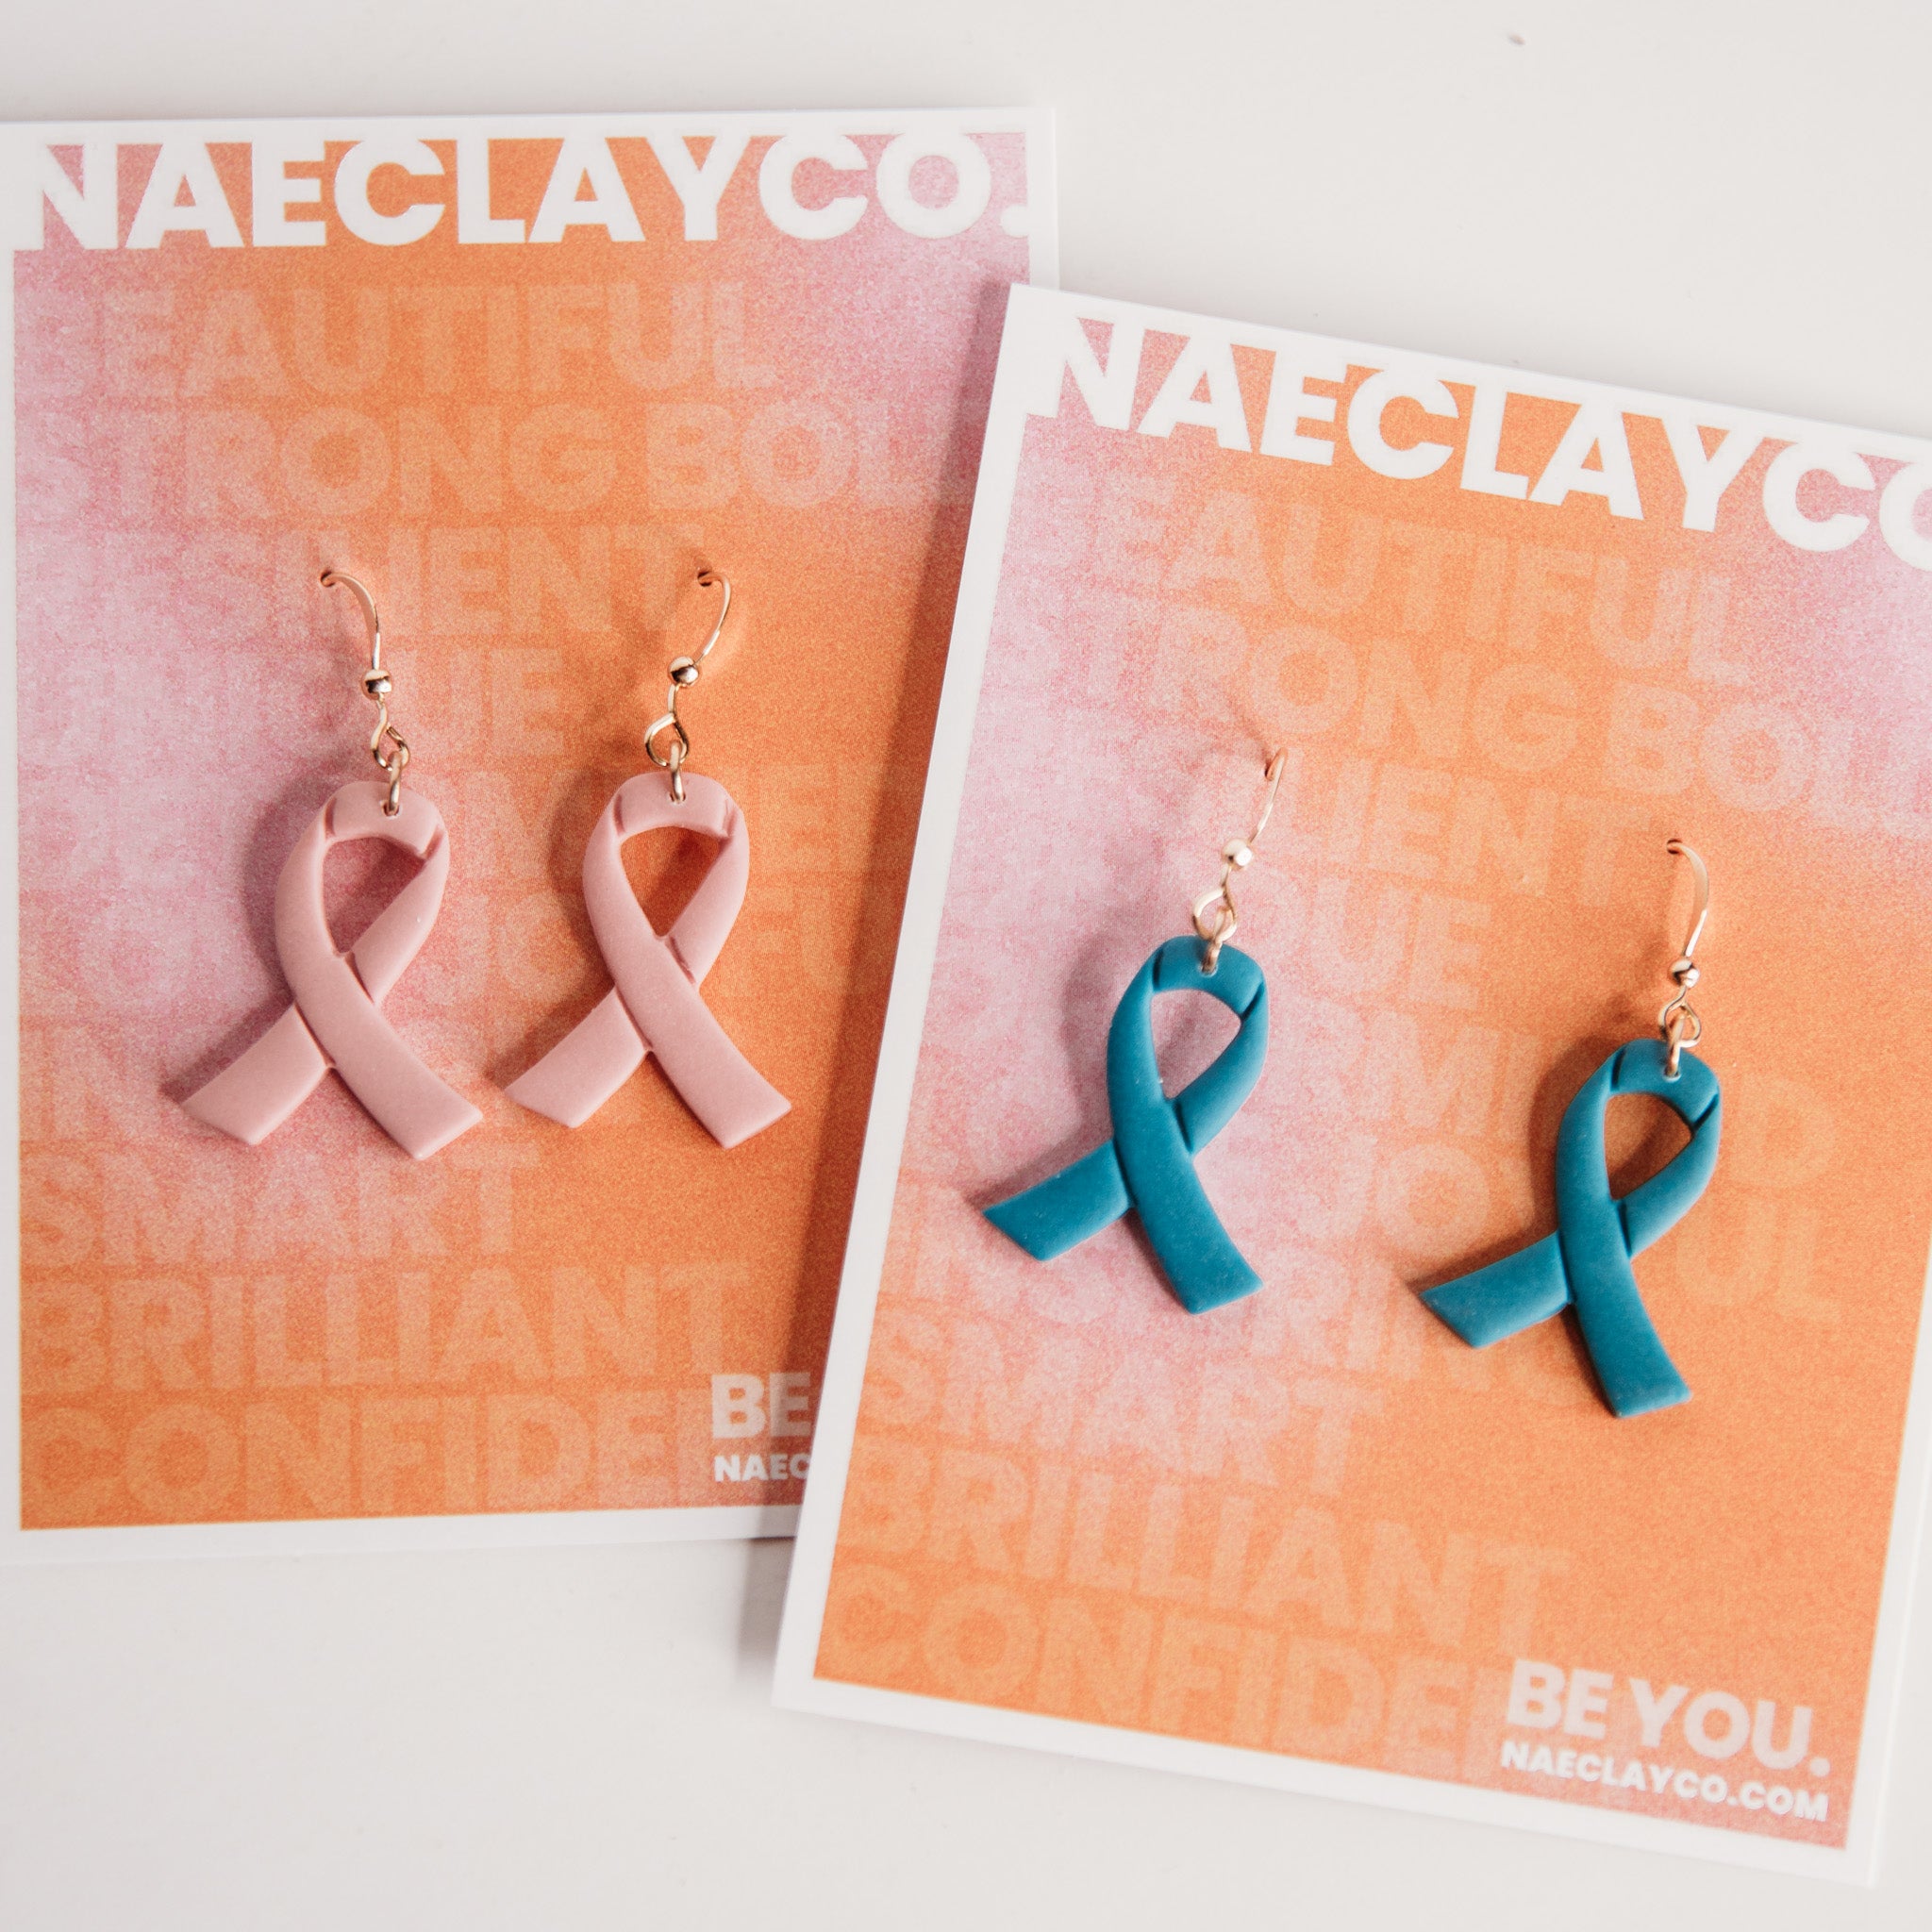 Cancer Awareness Earring Collection